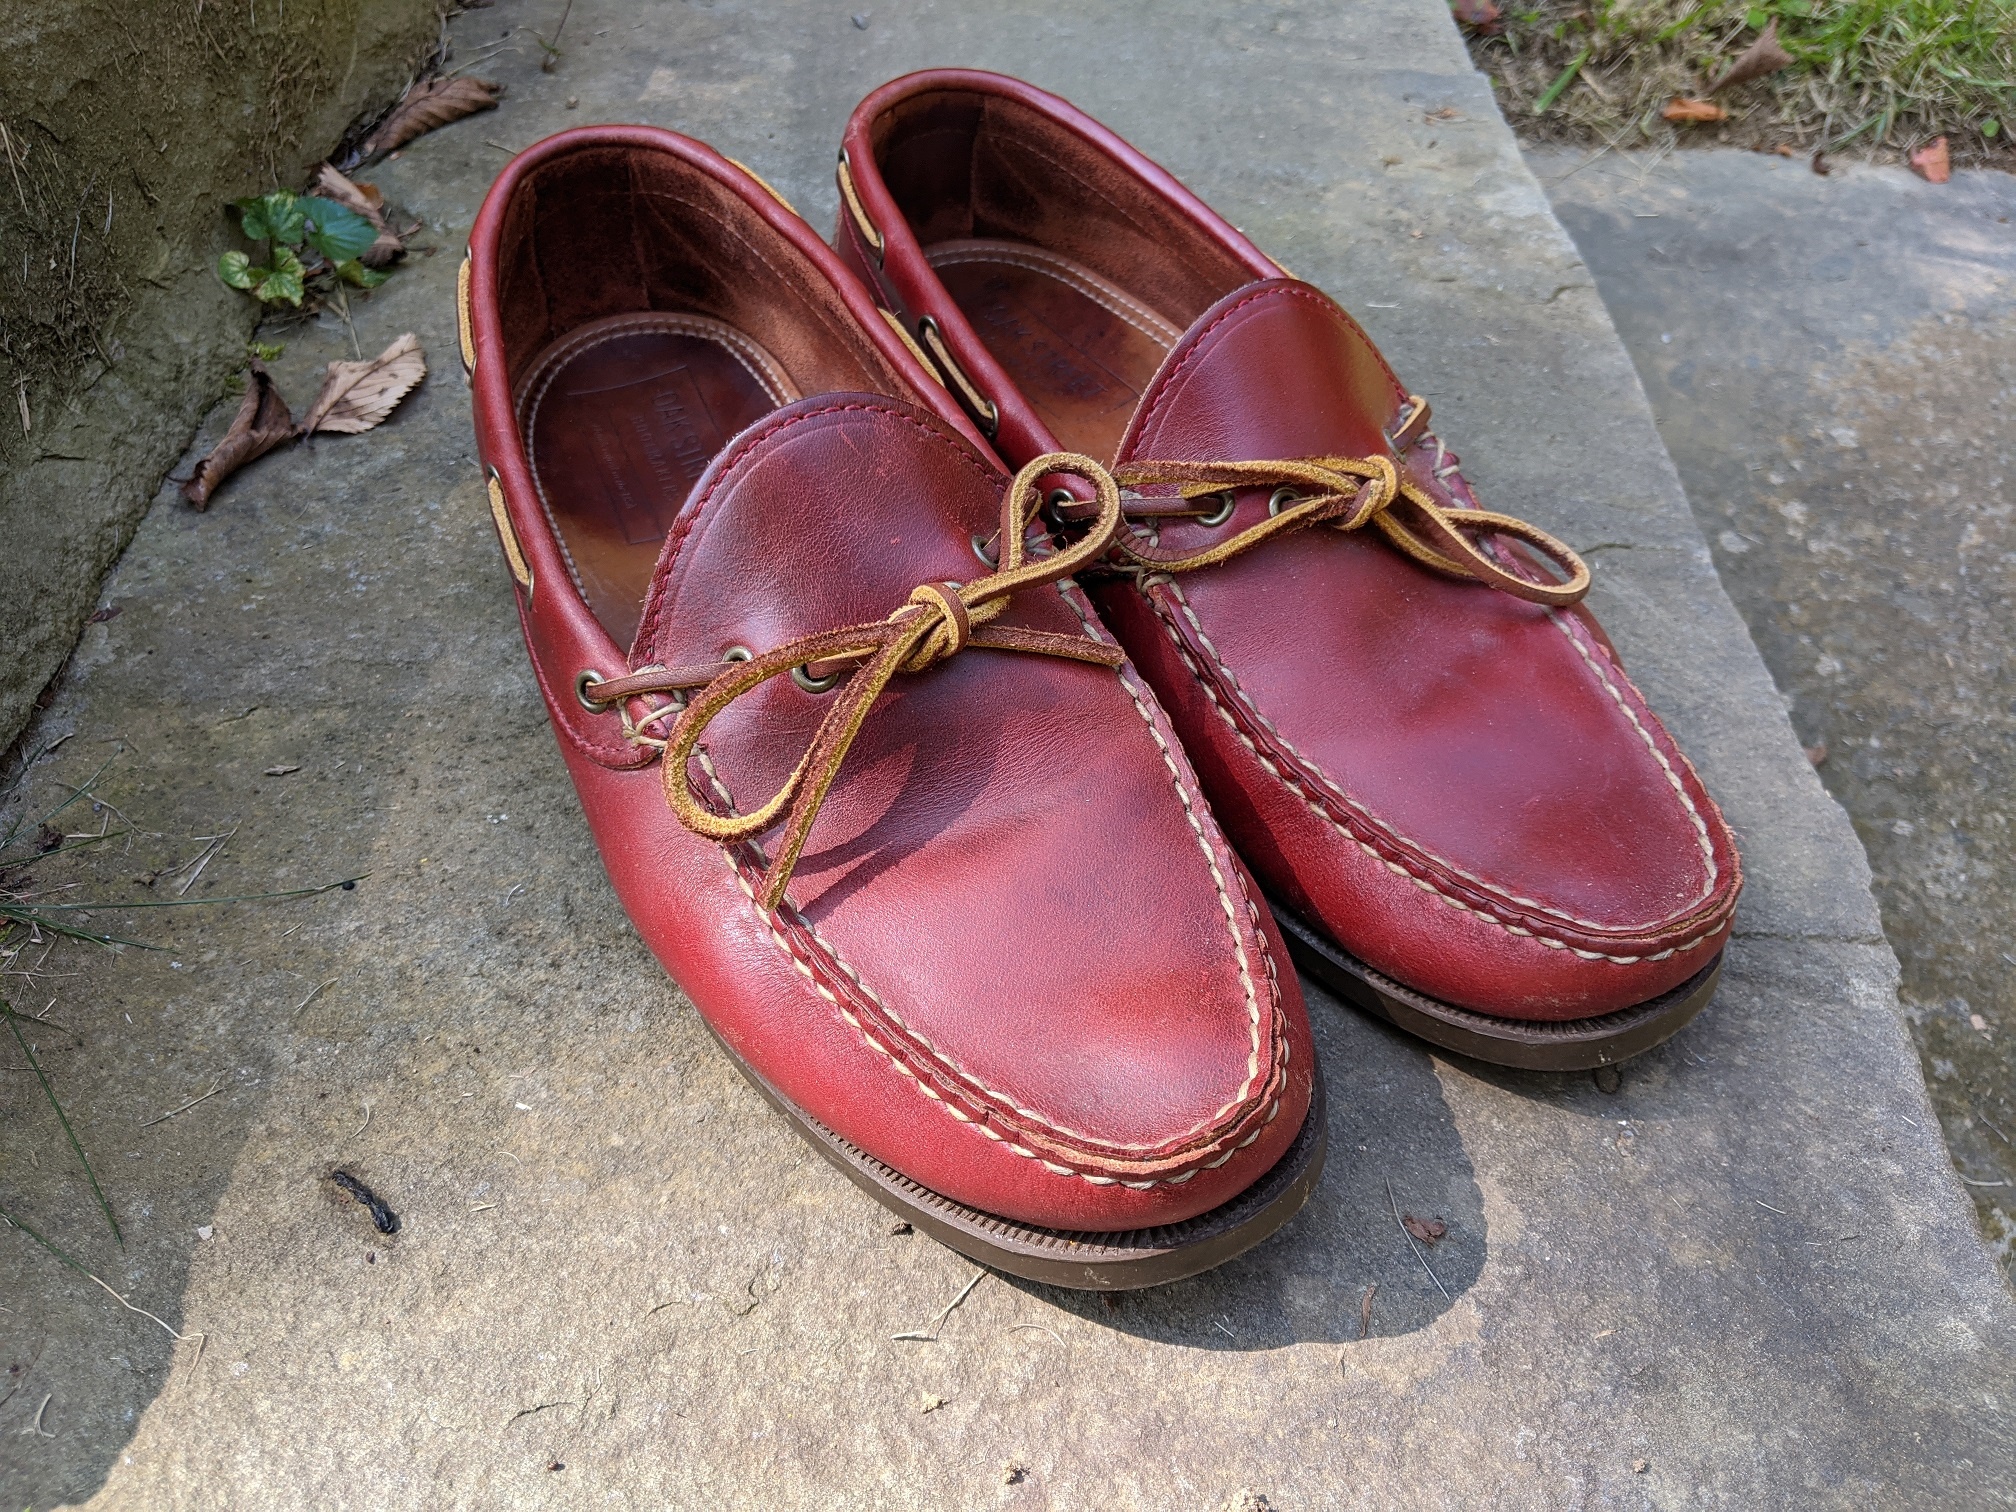 Oak Street Bootmakers Camp Moc: Five Year Review